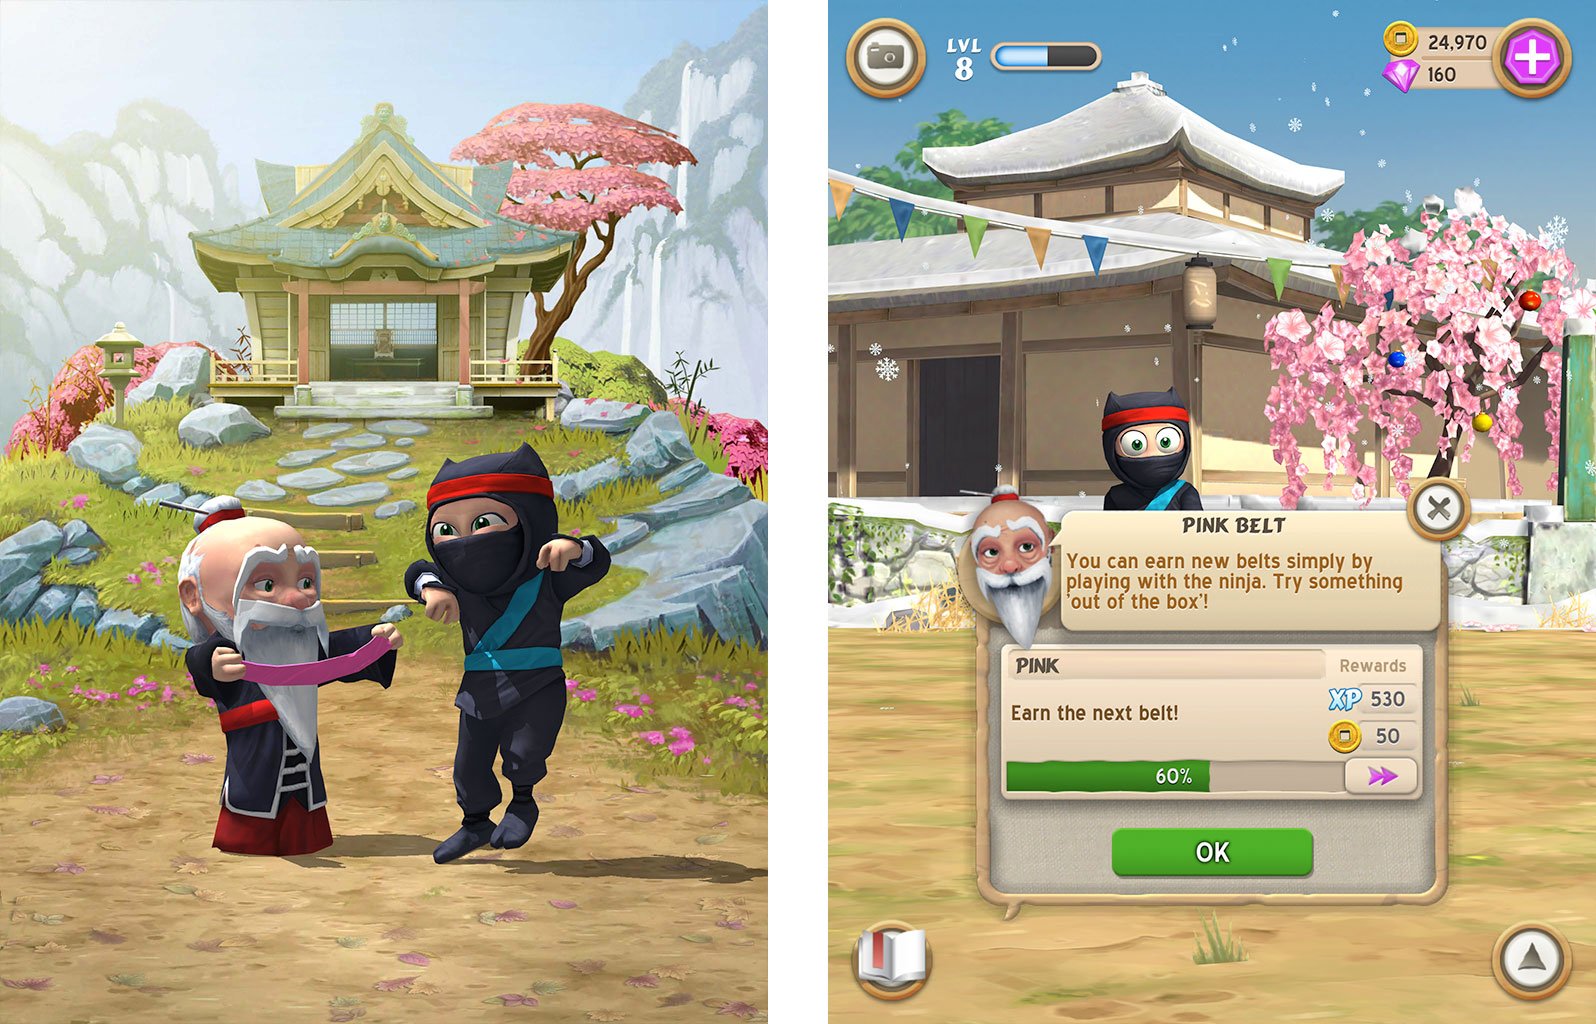 Clumsy Ninja Top 10 tips, tricks, and cheats: Complete quests